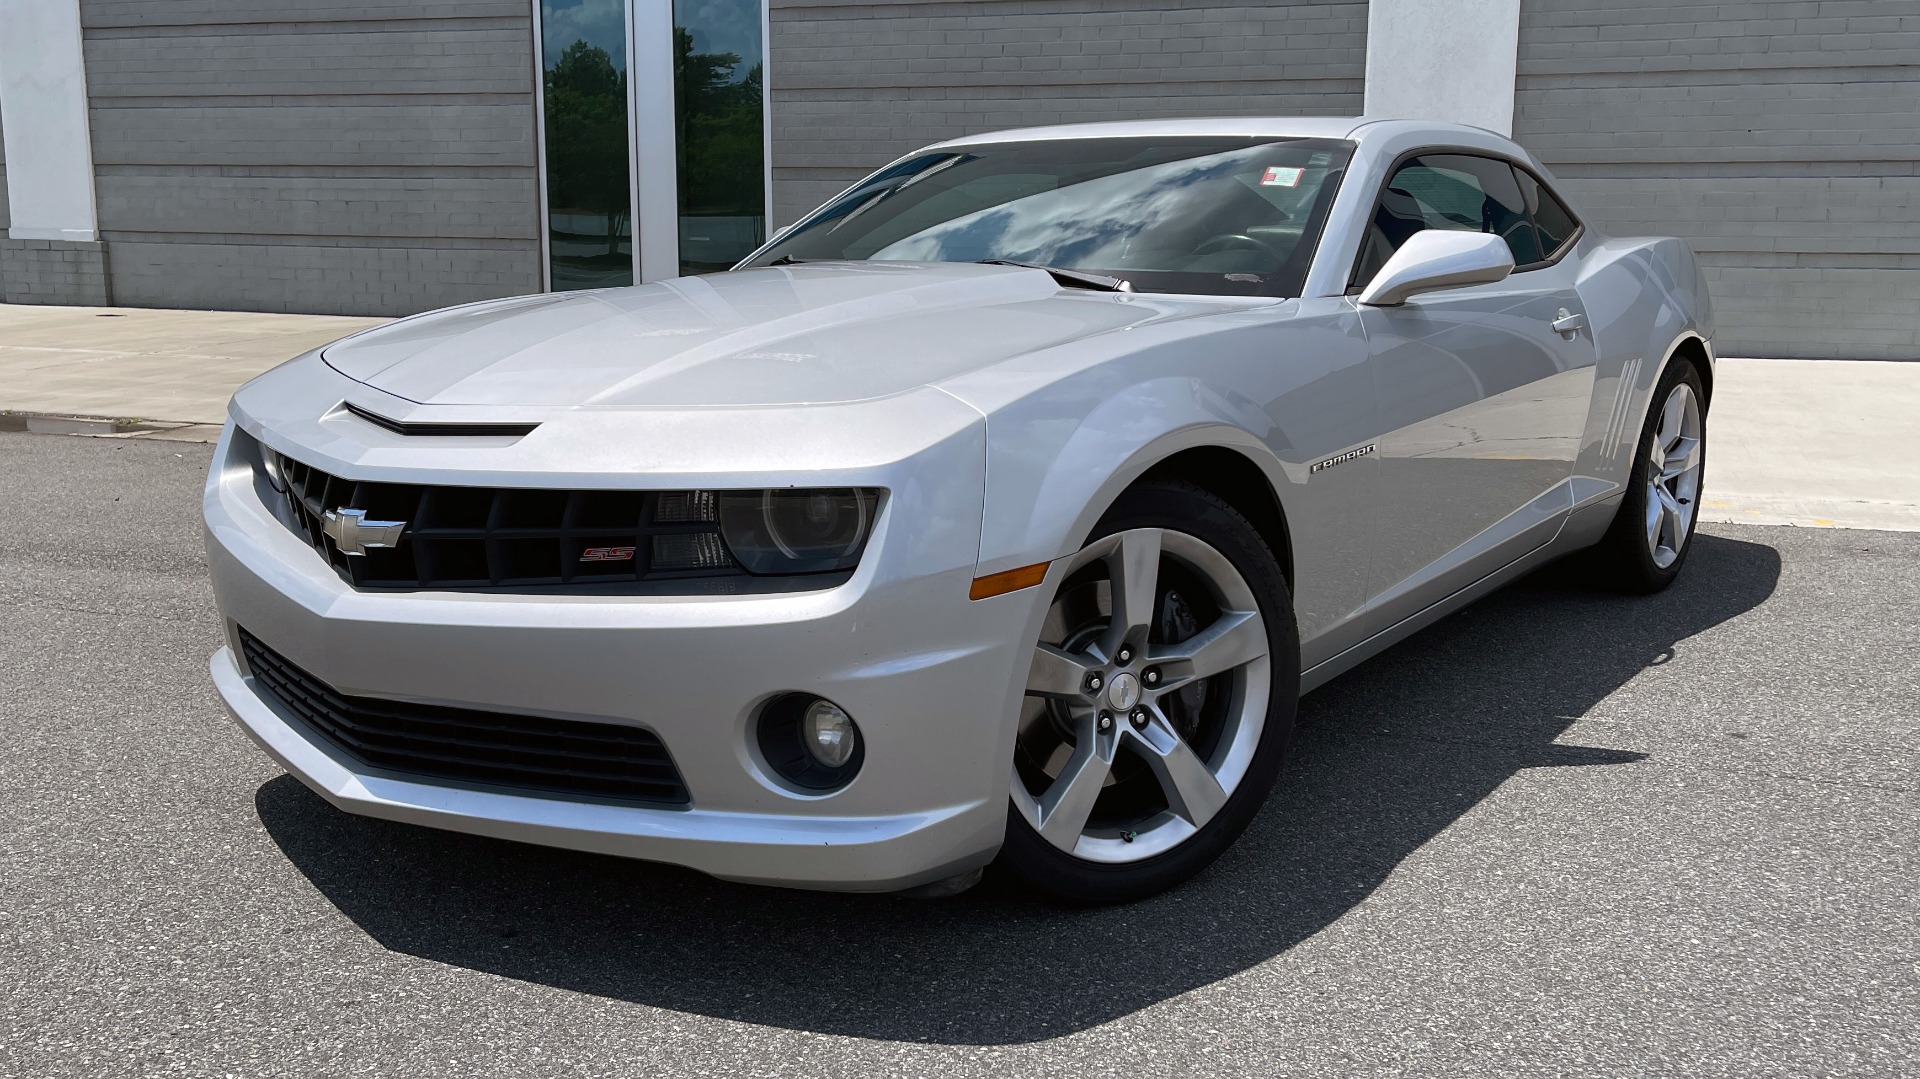 Used 2012 Chevrolet CAMARO SS COUPE / 6.2L V8 / 2SS / RS PKG / 6-SPD AUTO / SUNROOF / REMOTE START for sale Sold at Formula Imports in Charlotte NC 28227 1